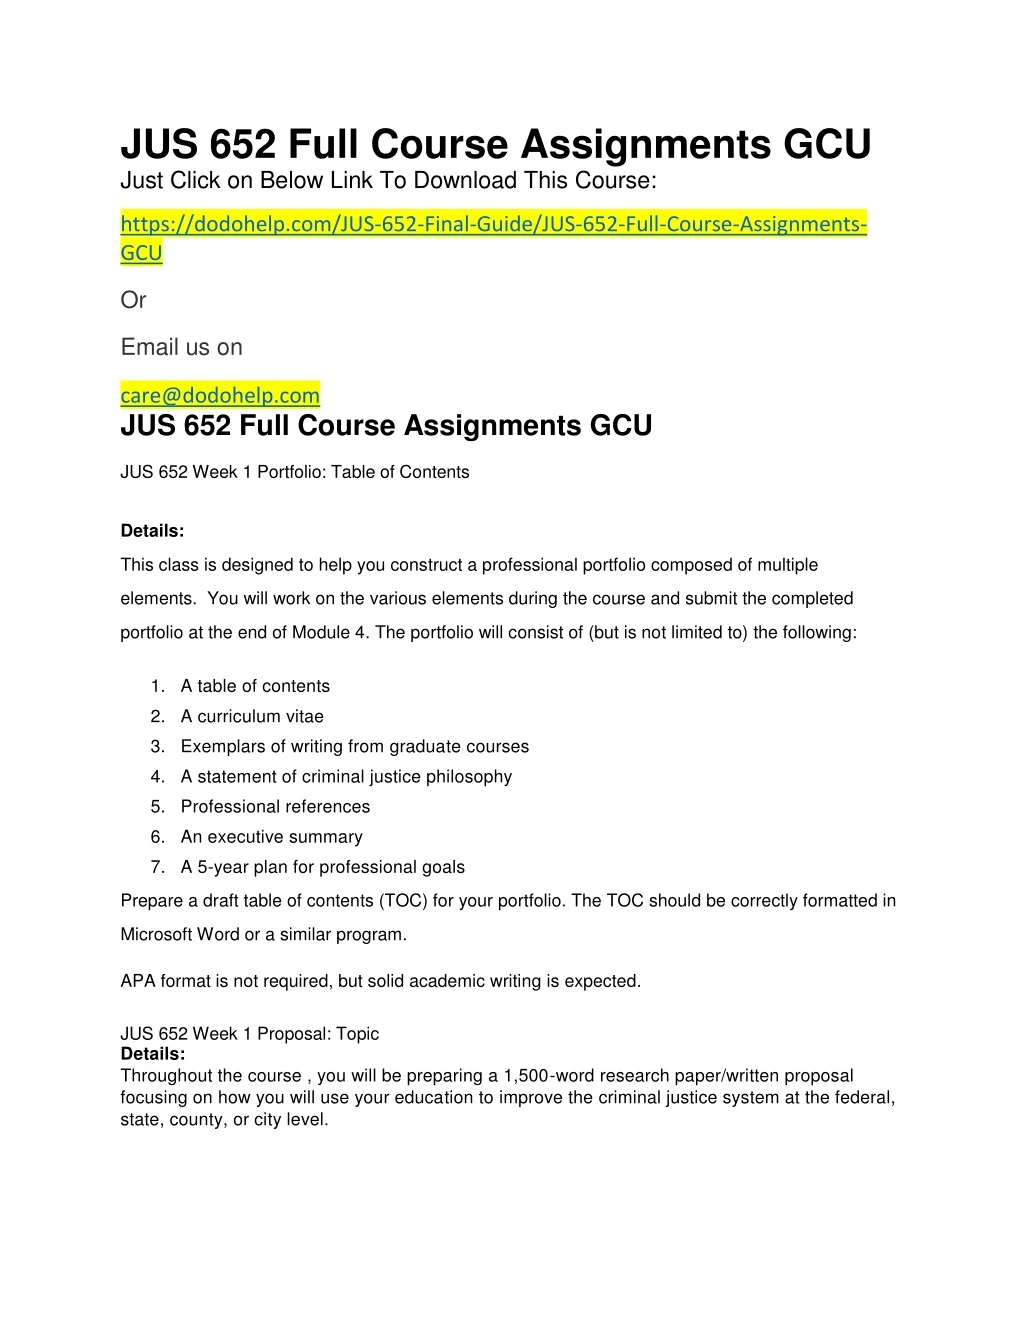 jus 652 full course assignments gcu just click